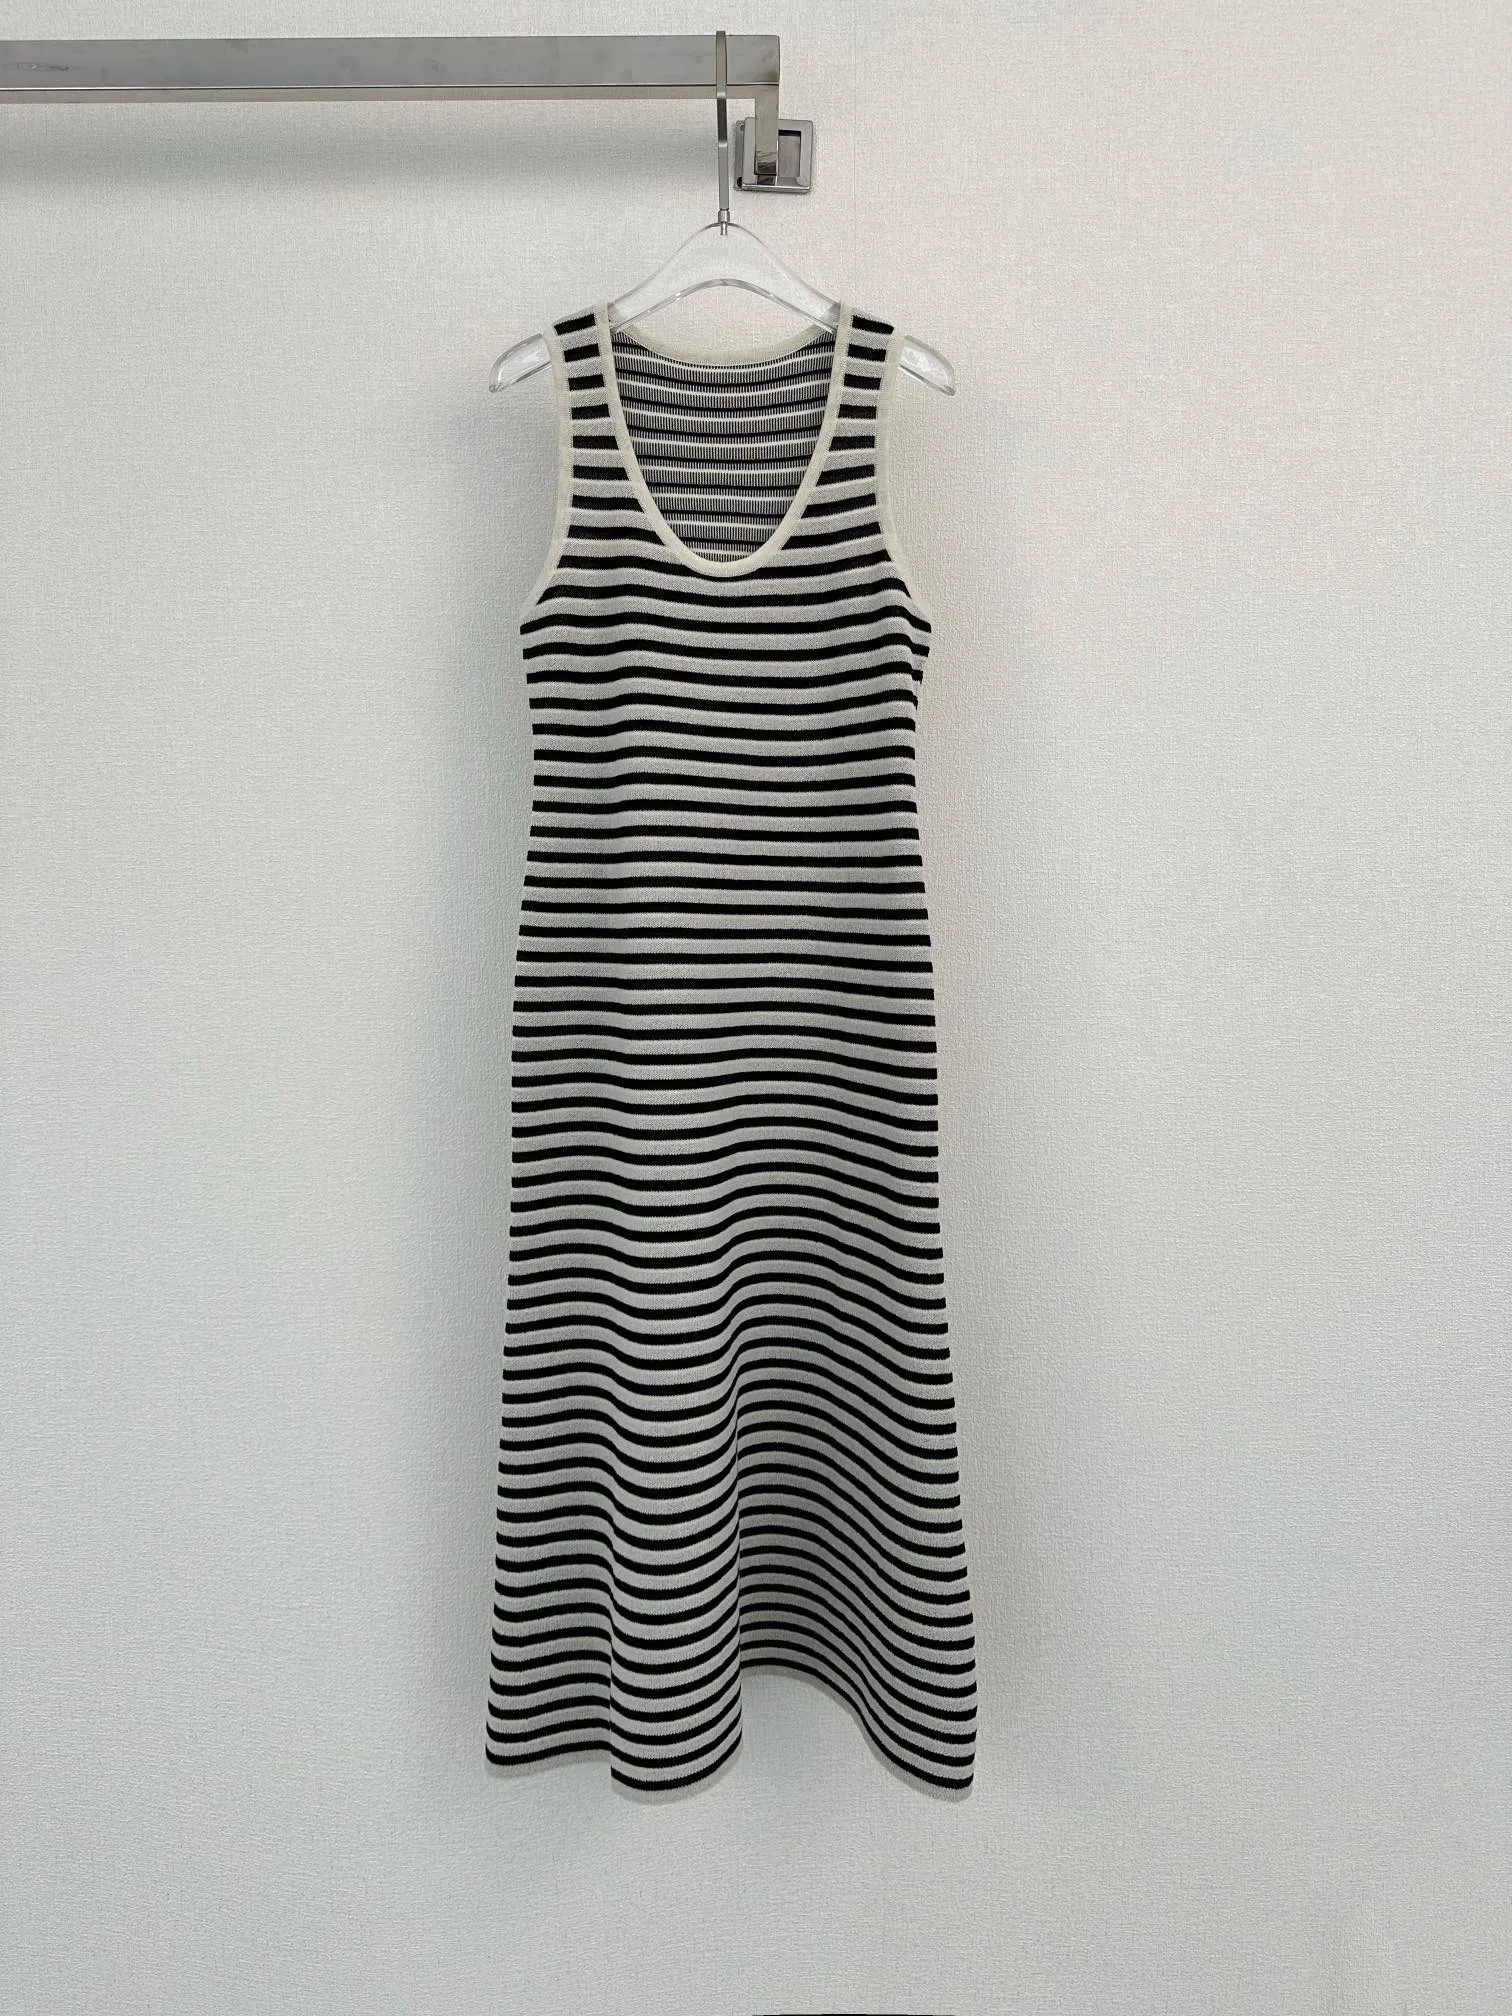 Classic and durable tank top striped dress